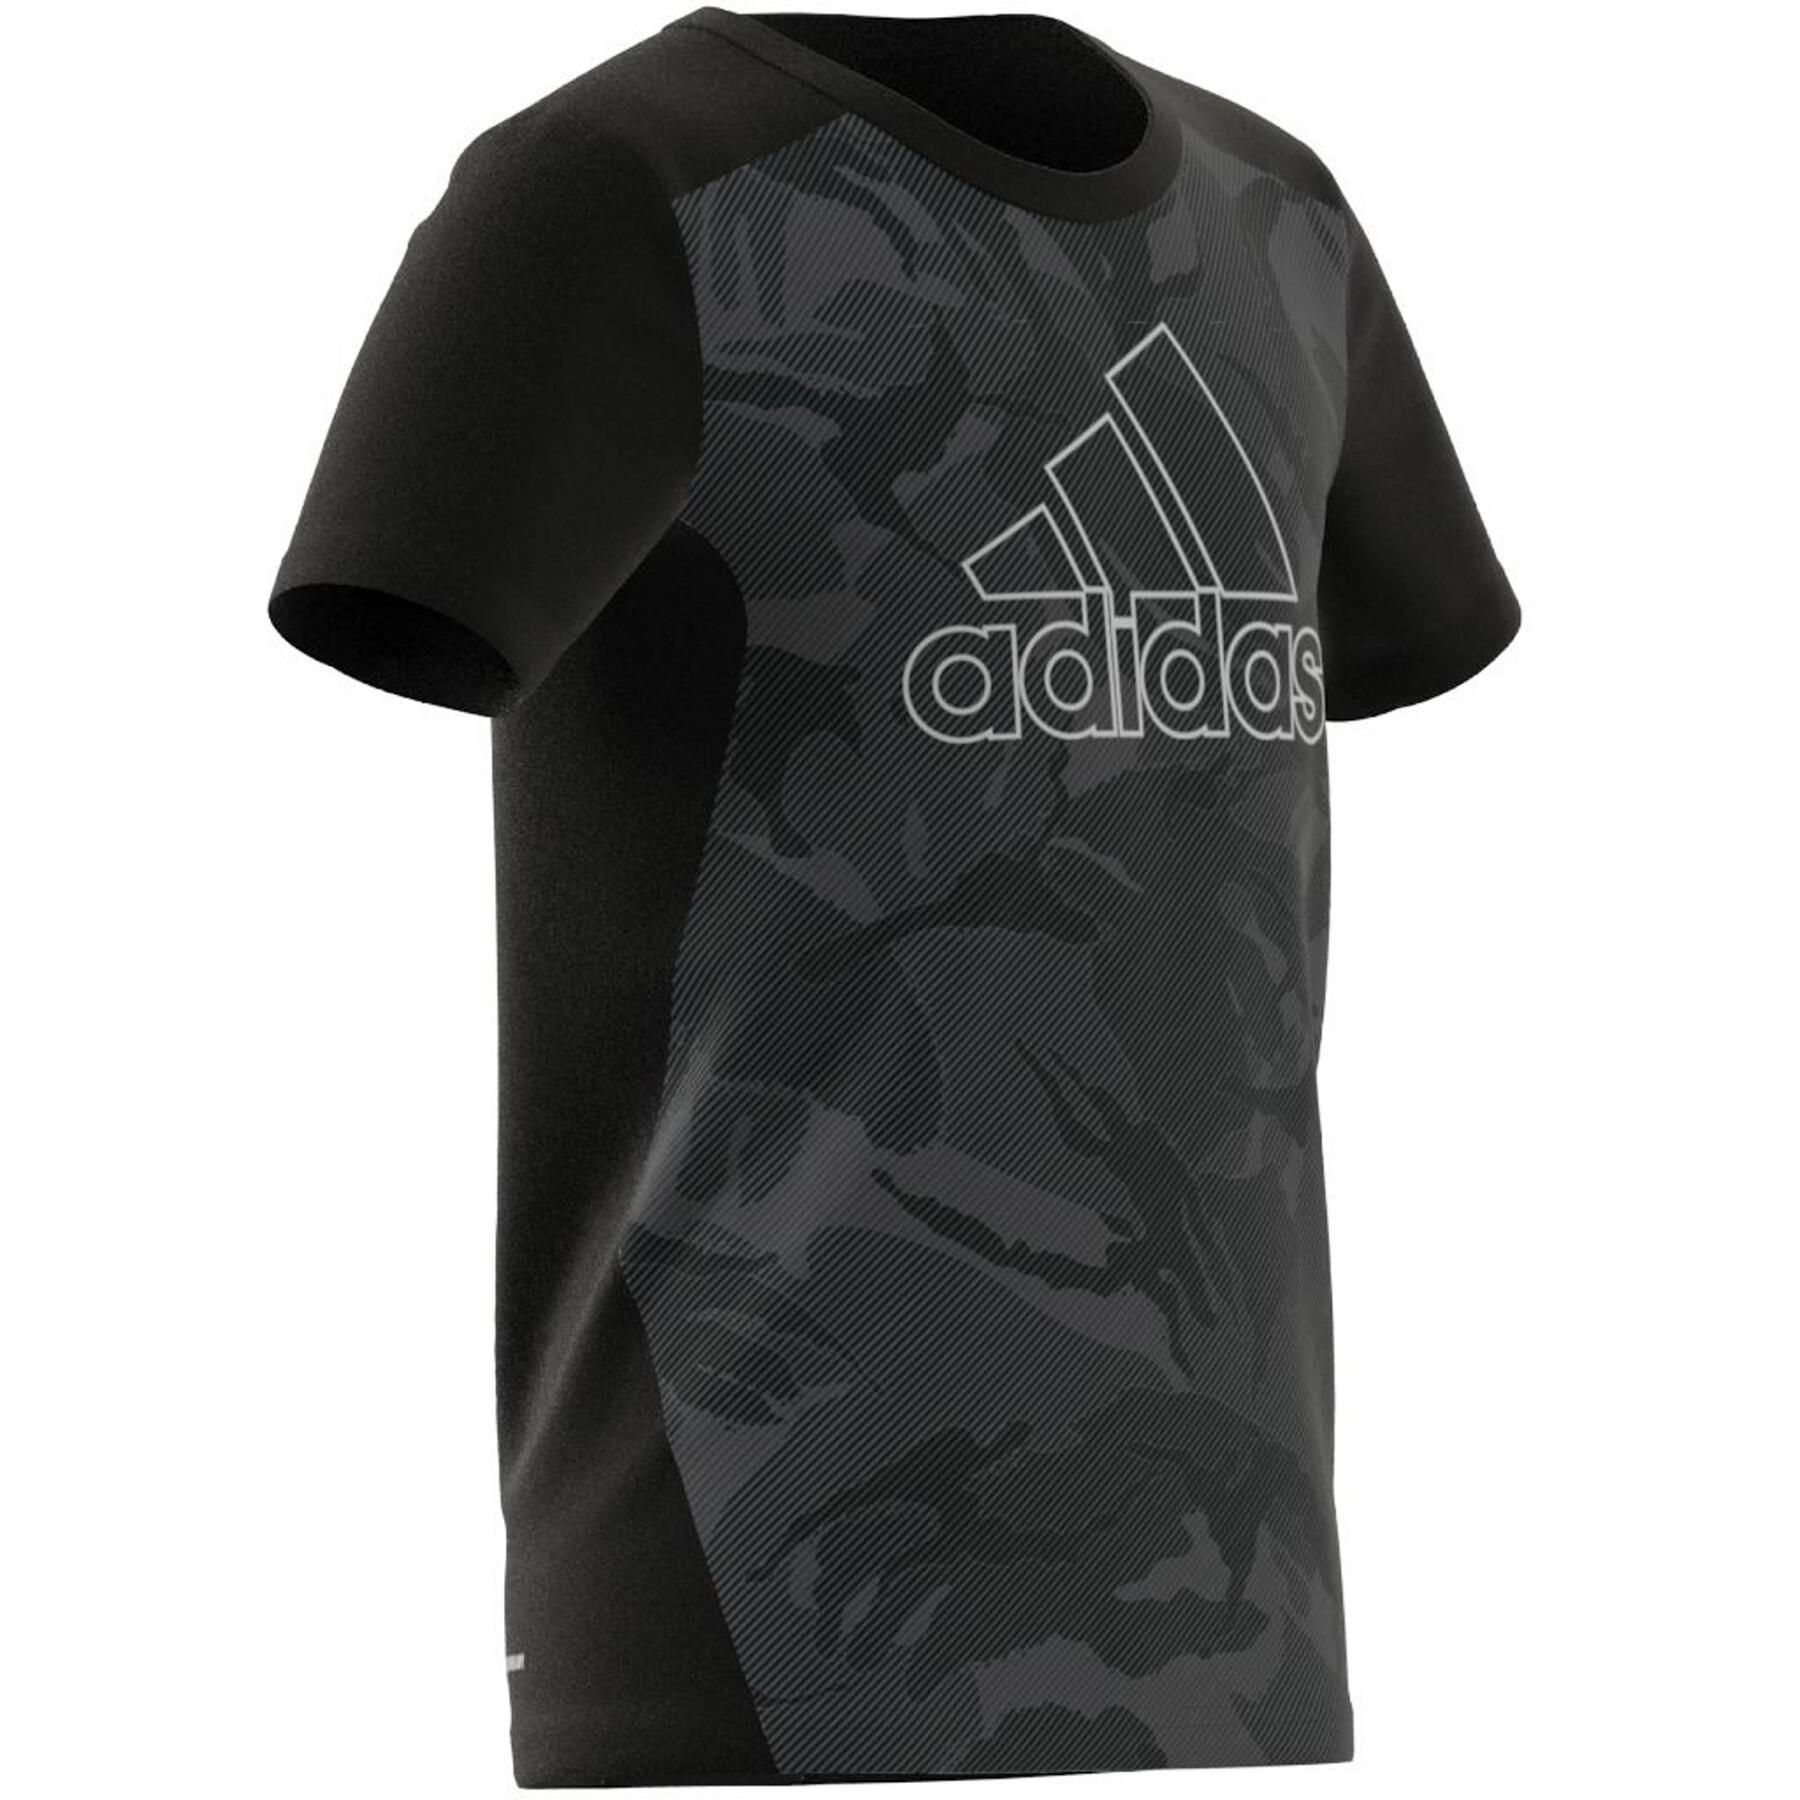 Child's T-shirt adidas Designed To Move Graphic